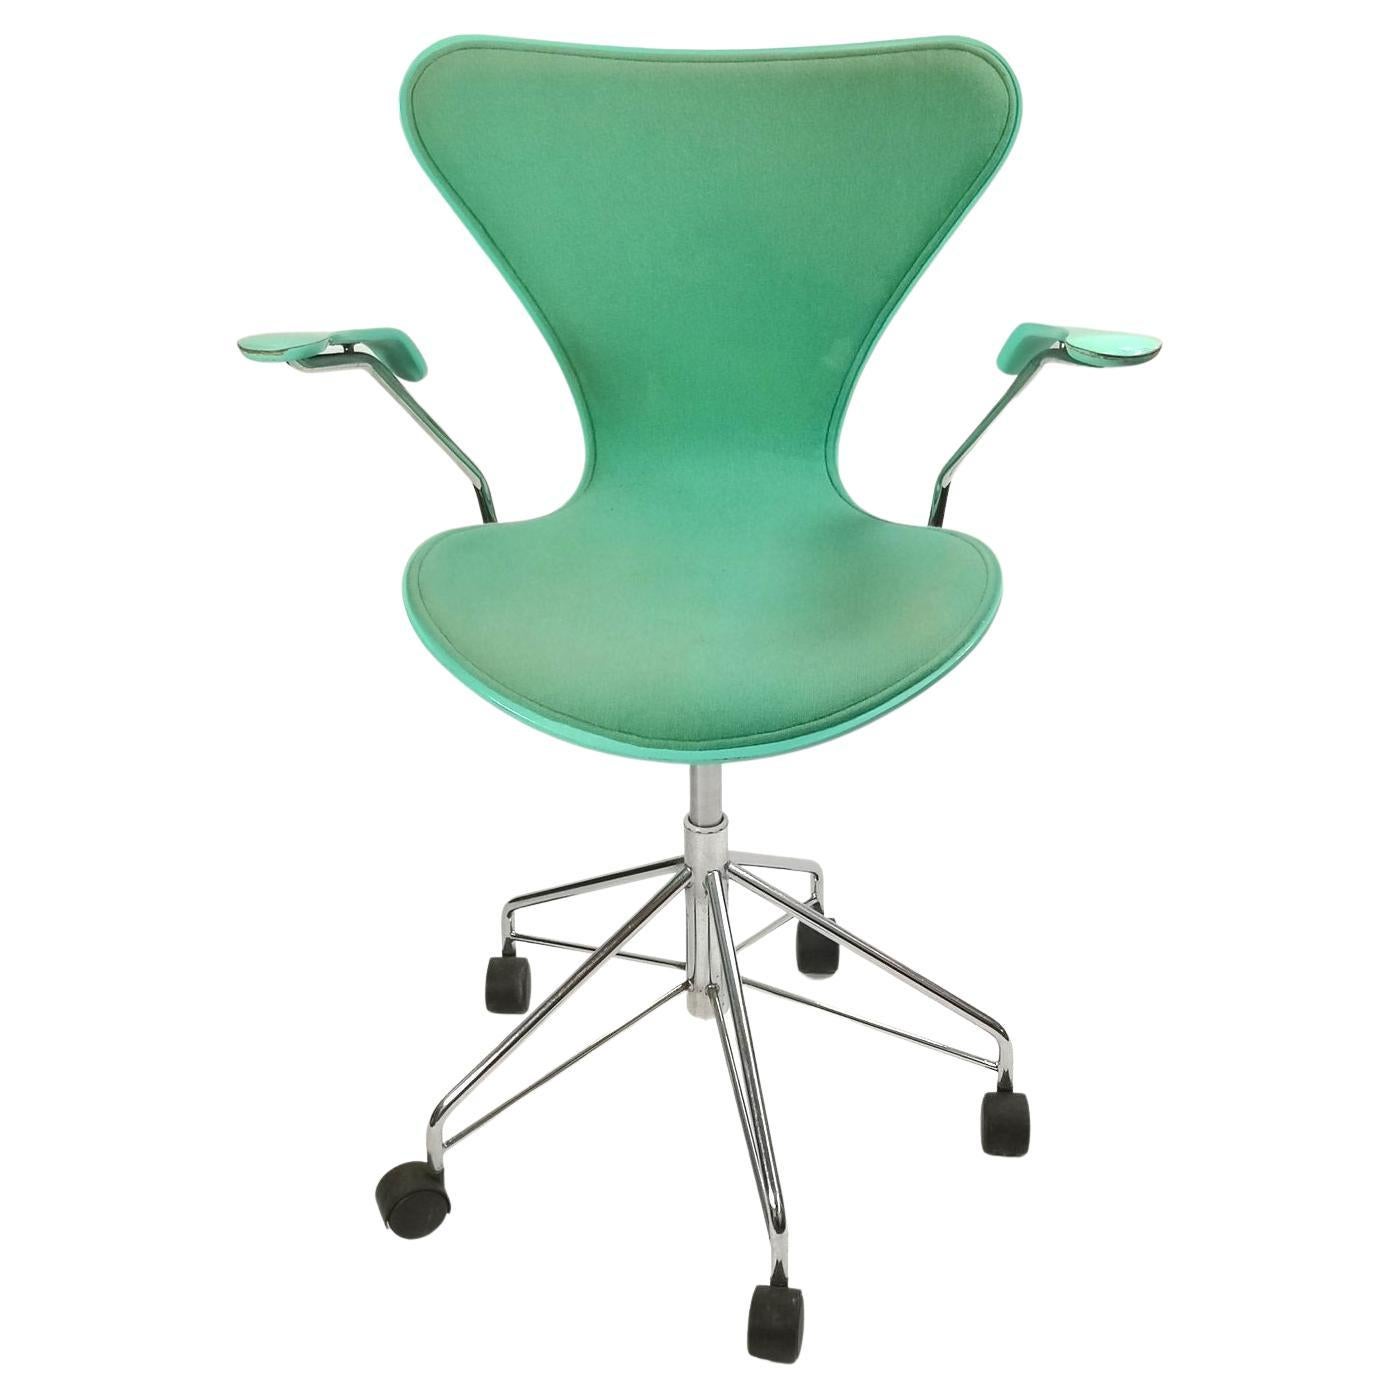 "Series 7", or model 3217 office chair designed by Arne Jacobsen (50170)